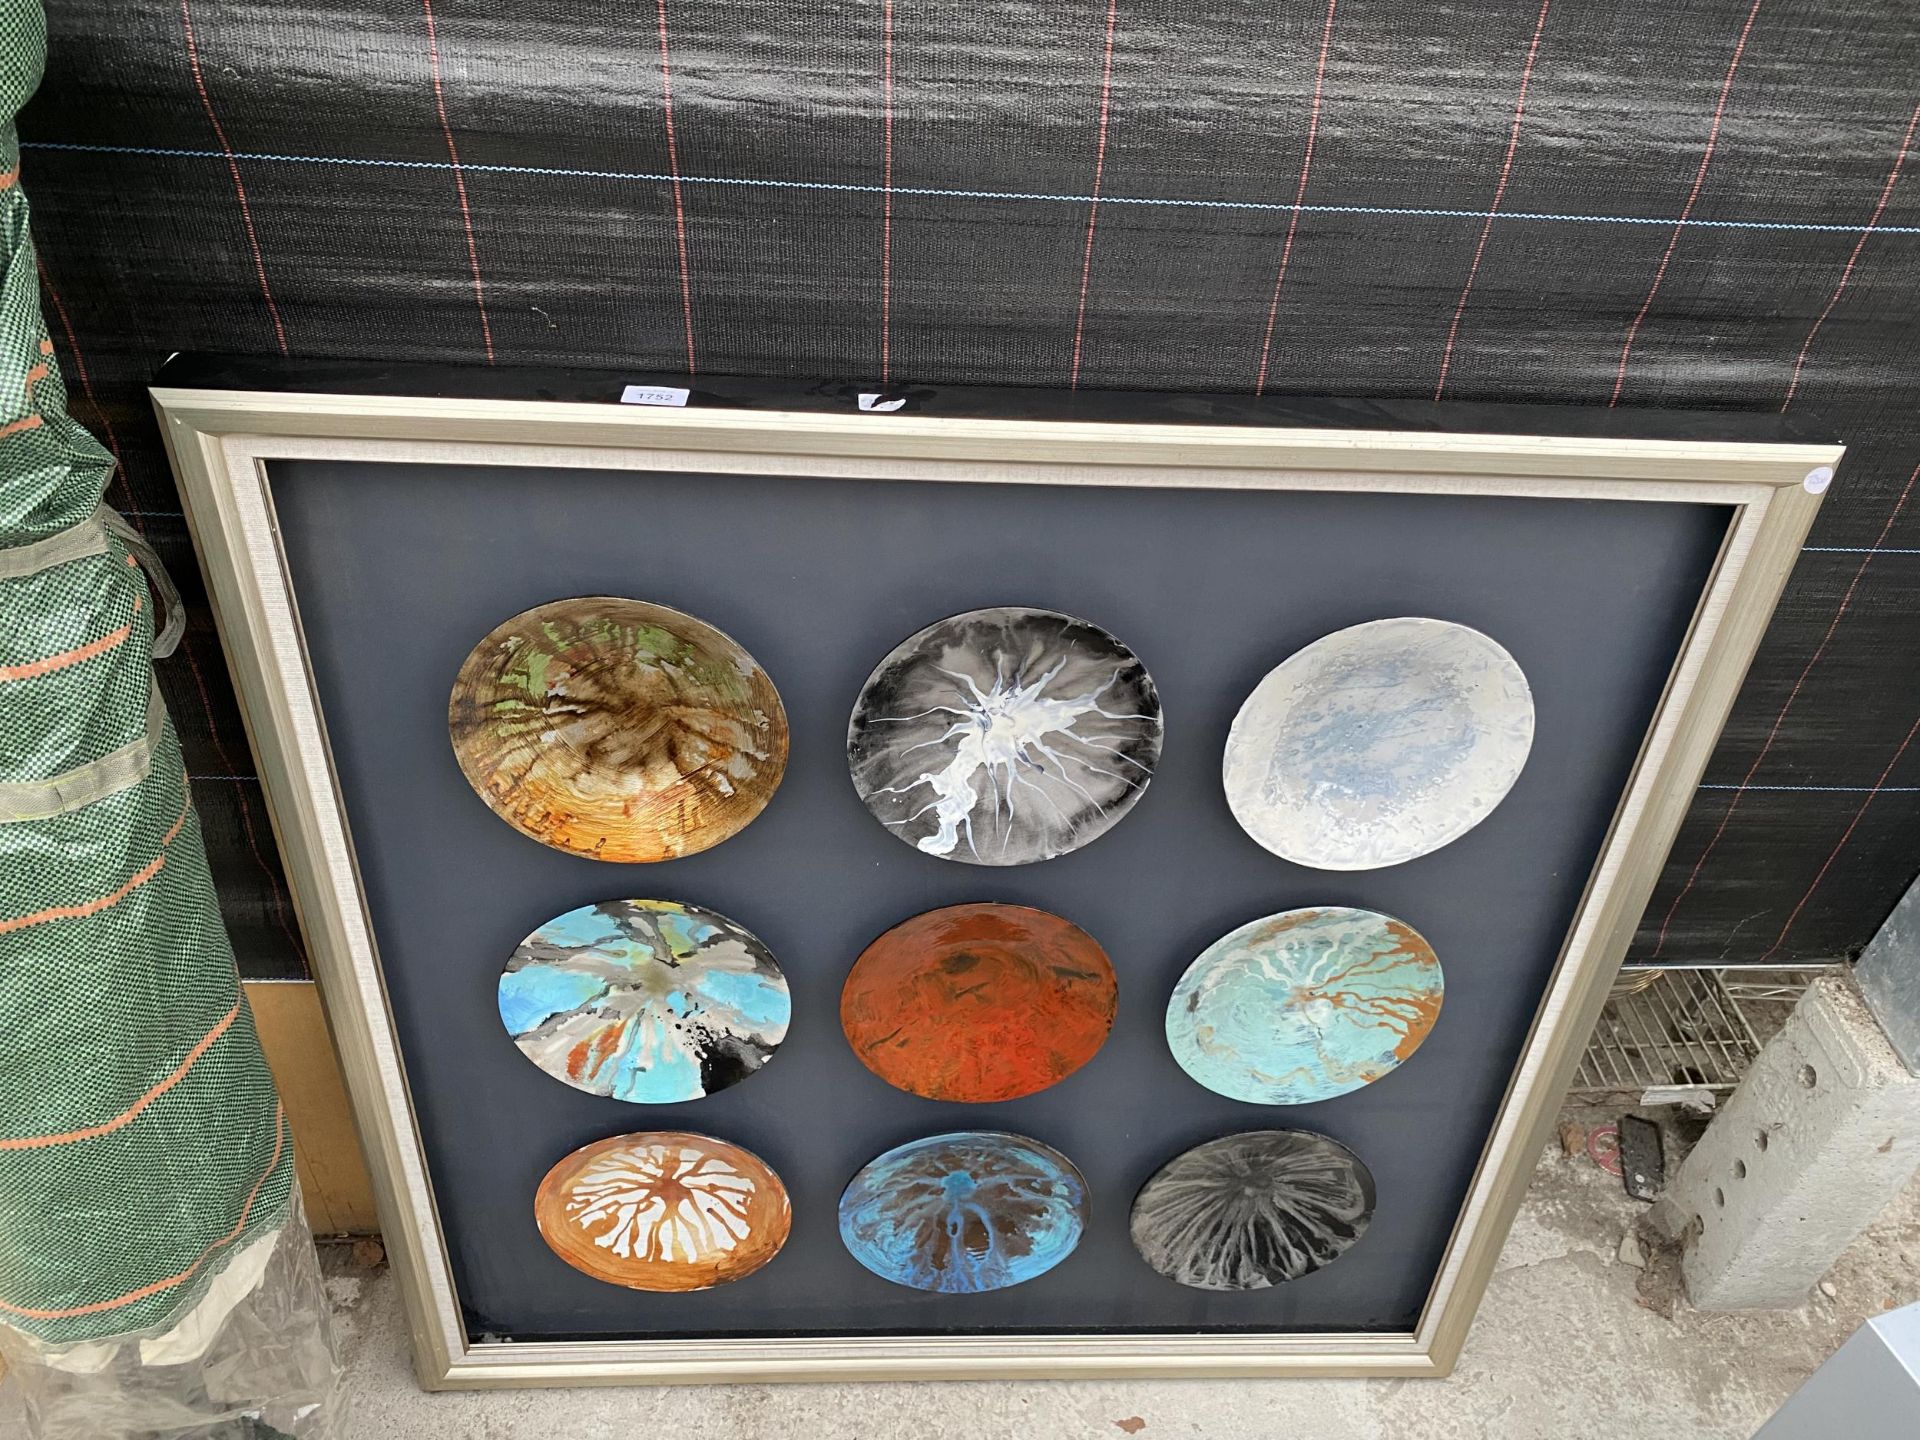 NINE ORNAMENTAL PLATES MOUNTED IN FRAME 42" SQUARE